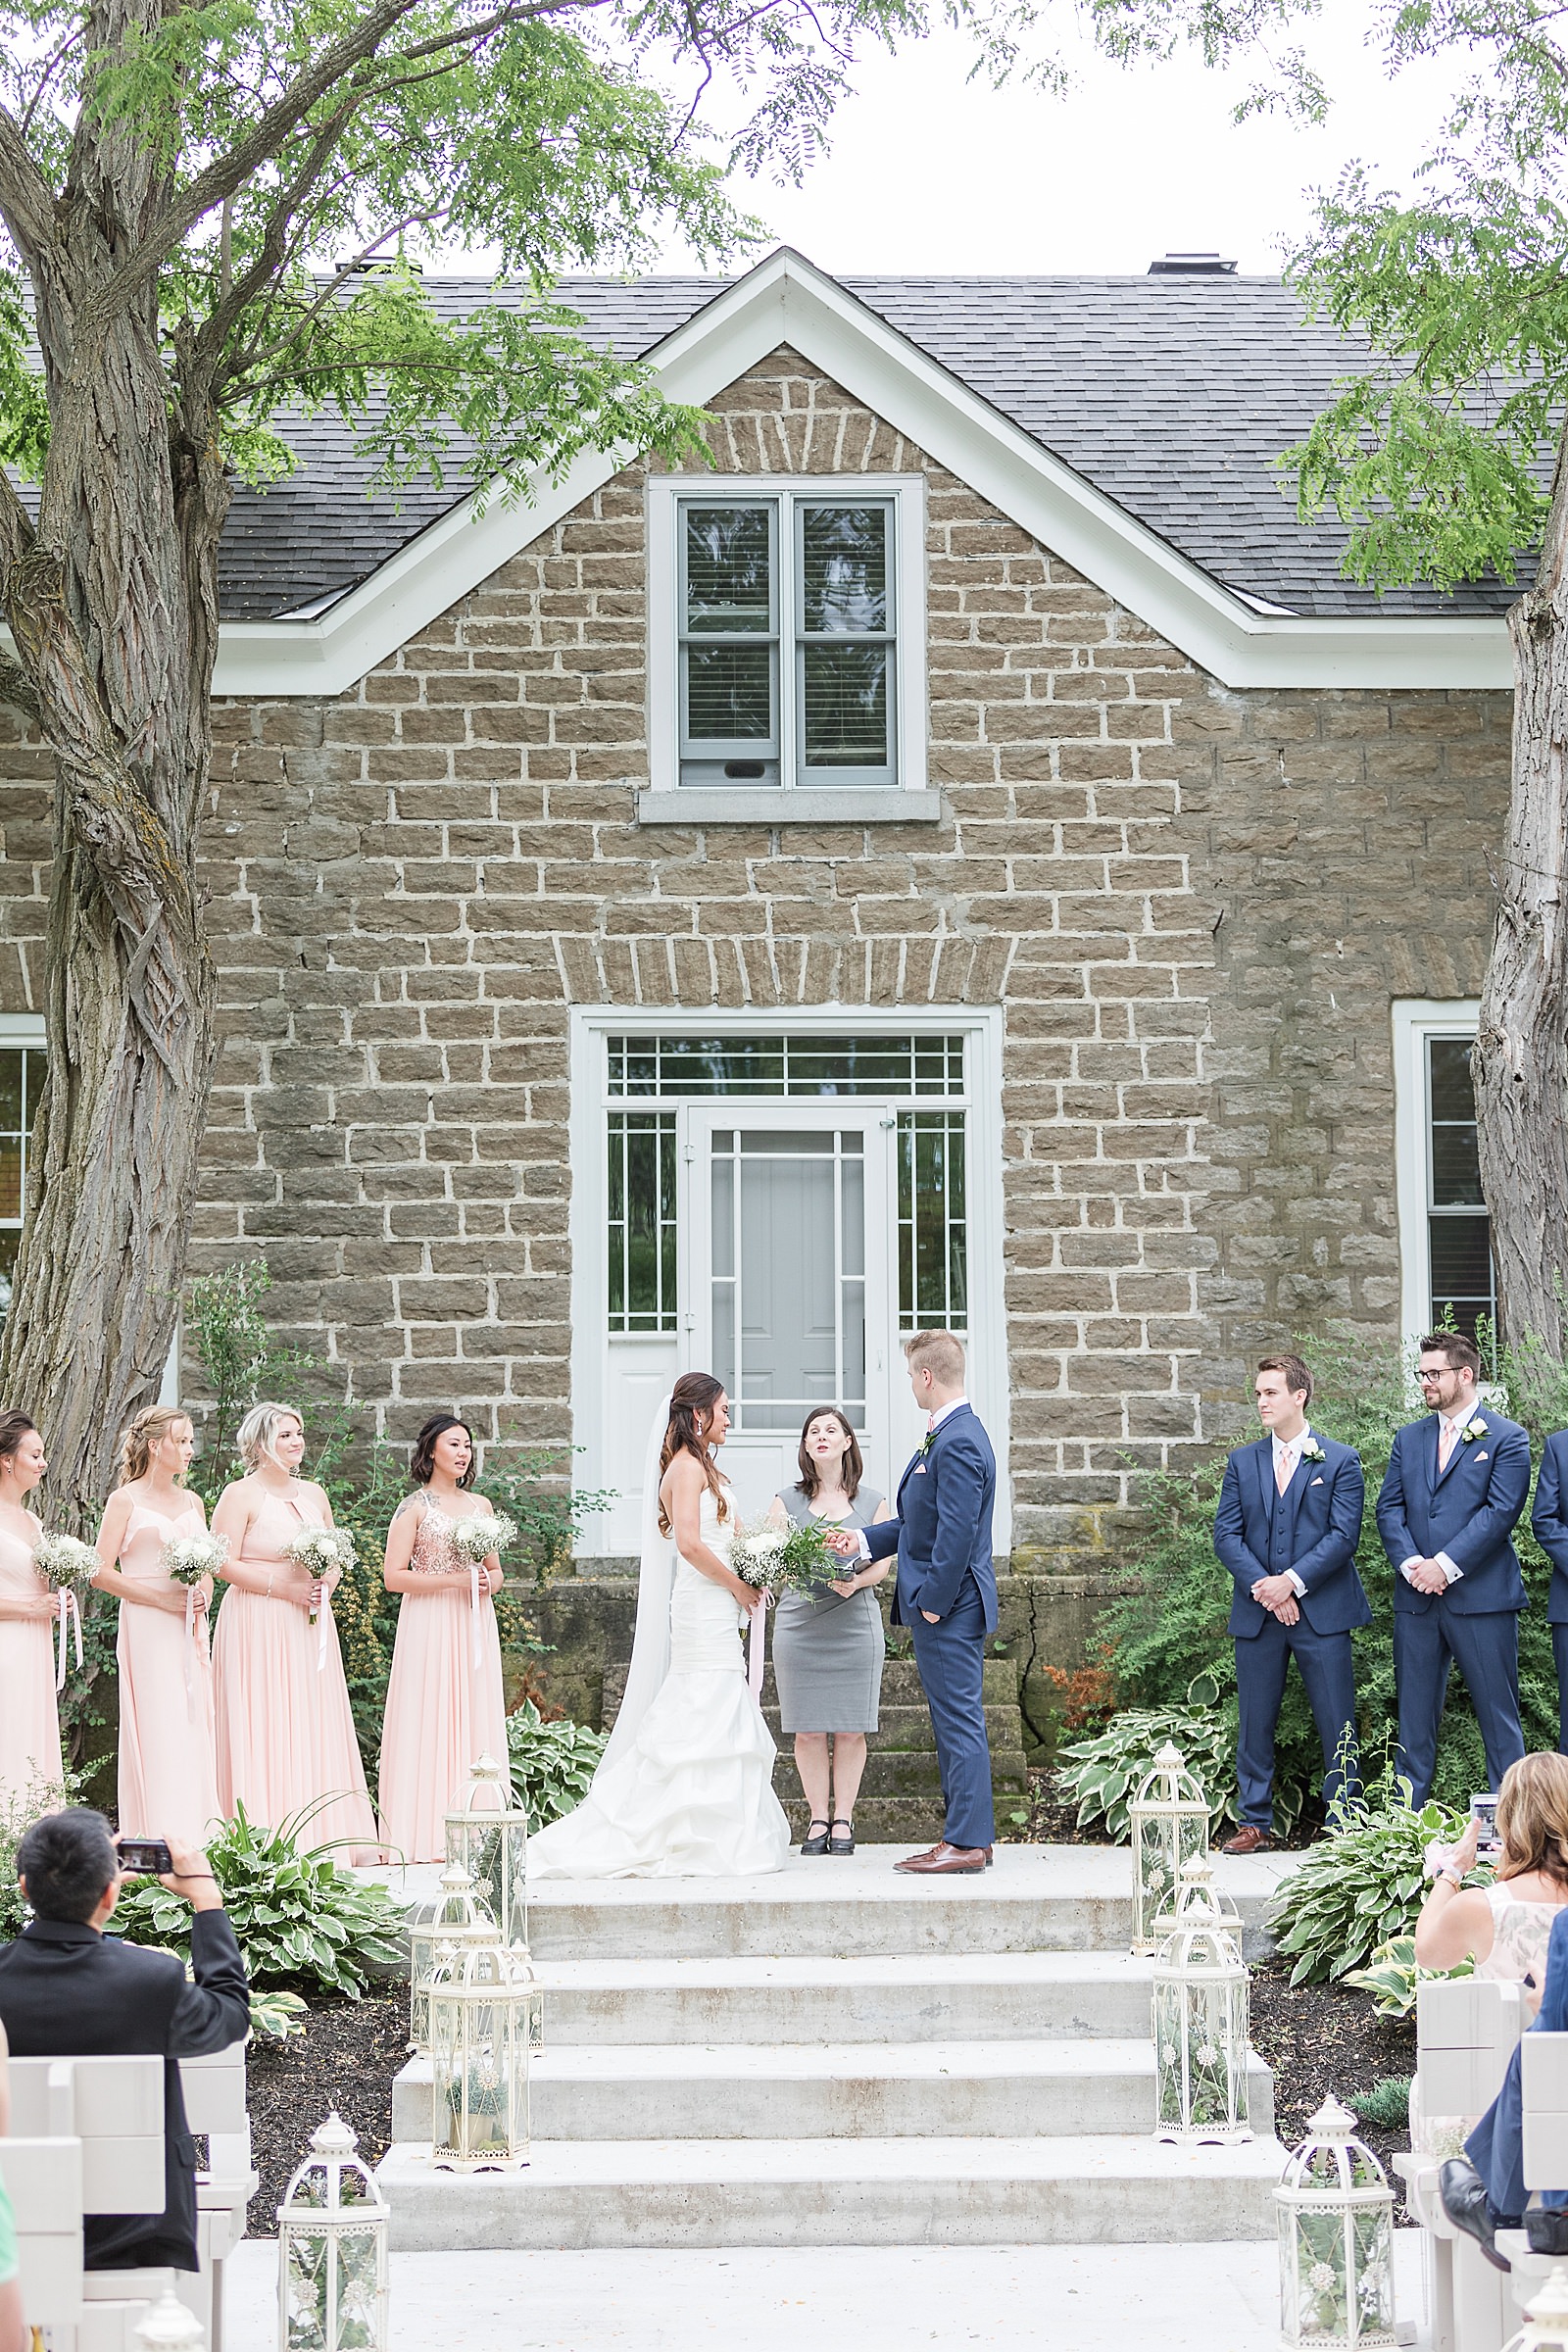 Summer stonefields estate wedding | ottawa wedding | wedding photos at the barn loft at stonefields estate in beckwith get more inspiration from this fun summertime wedding. #ottawawedding #weddingphotography #ottawaweddings